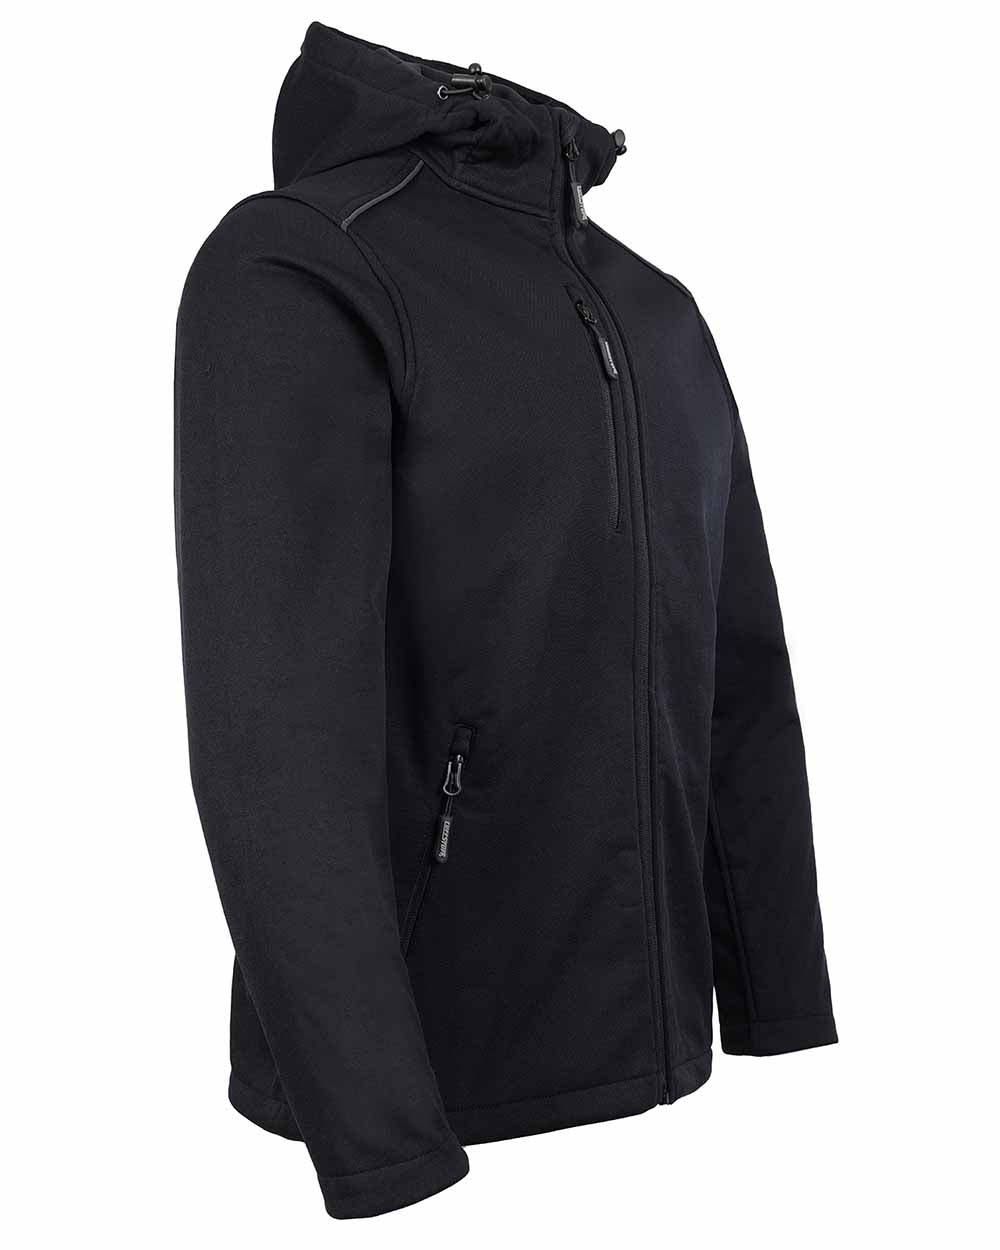 Side view showing hood and zip pockets TuffStuff Hale Jacket in  black 